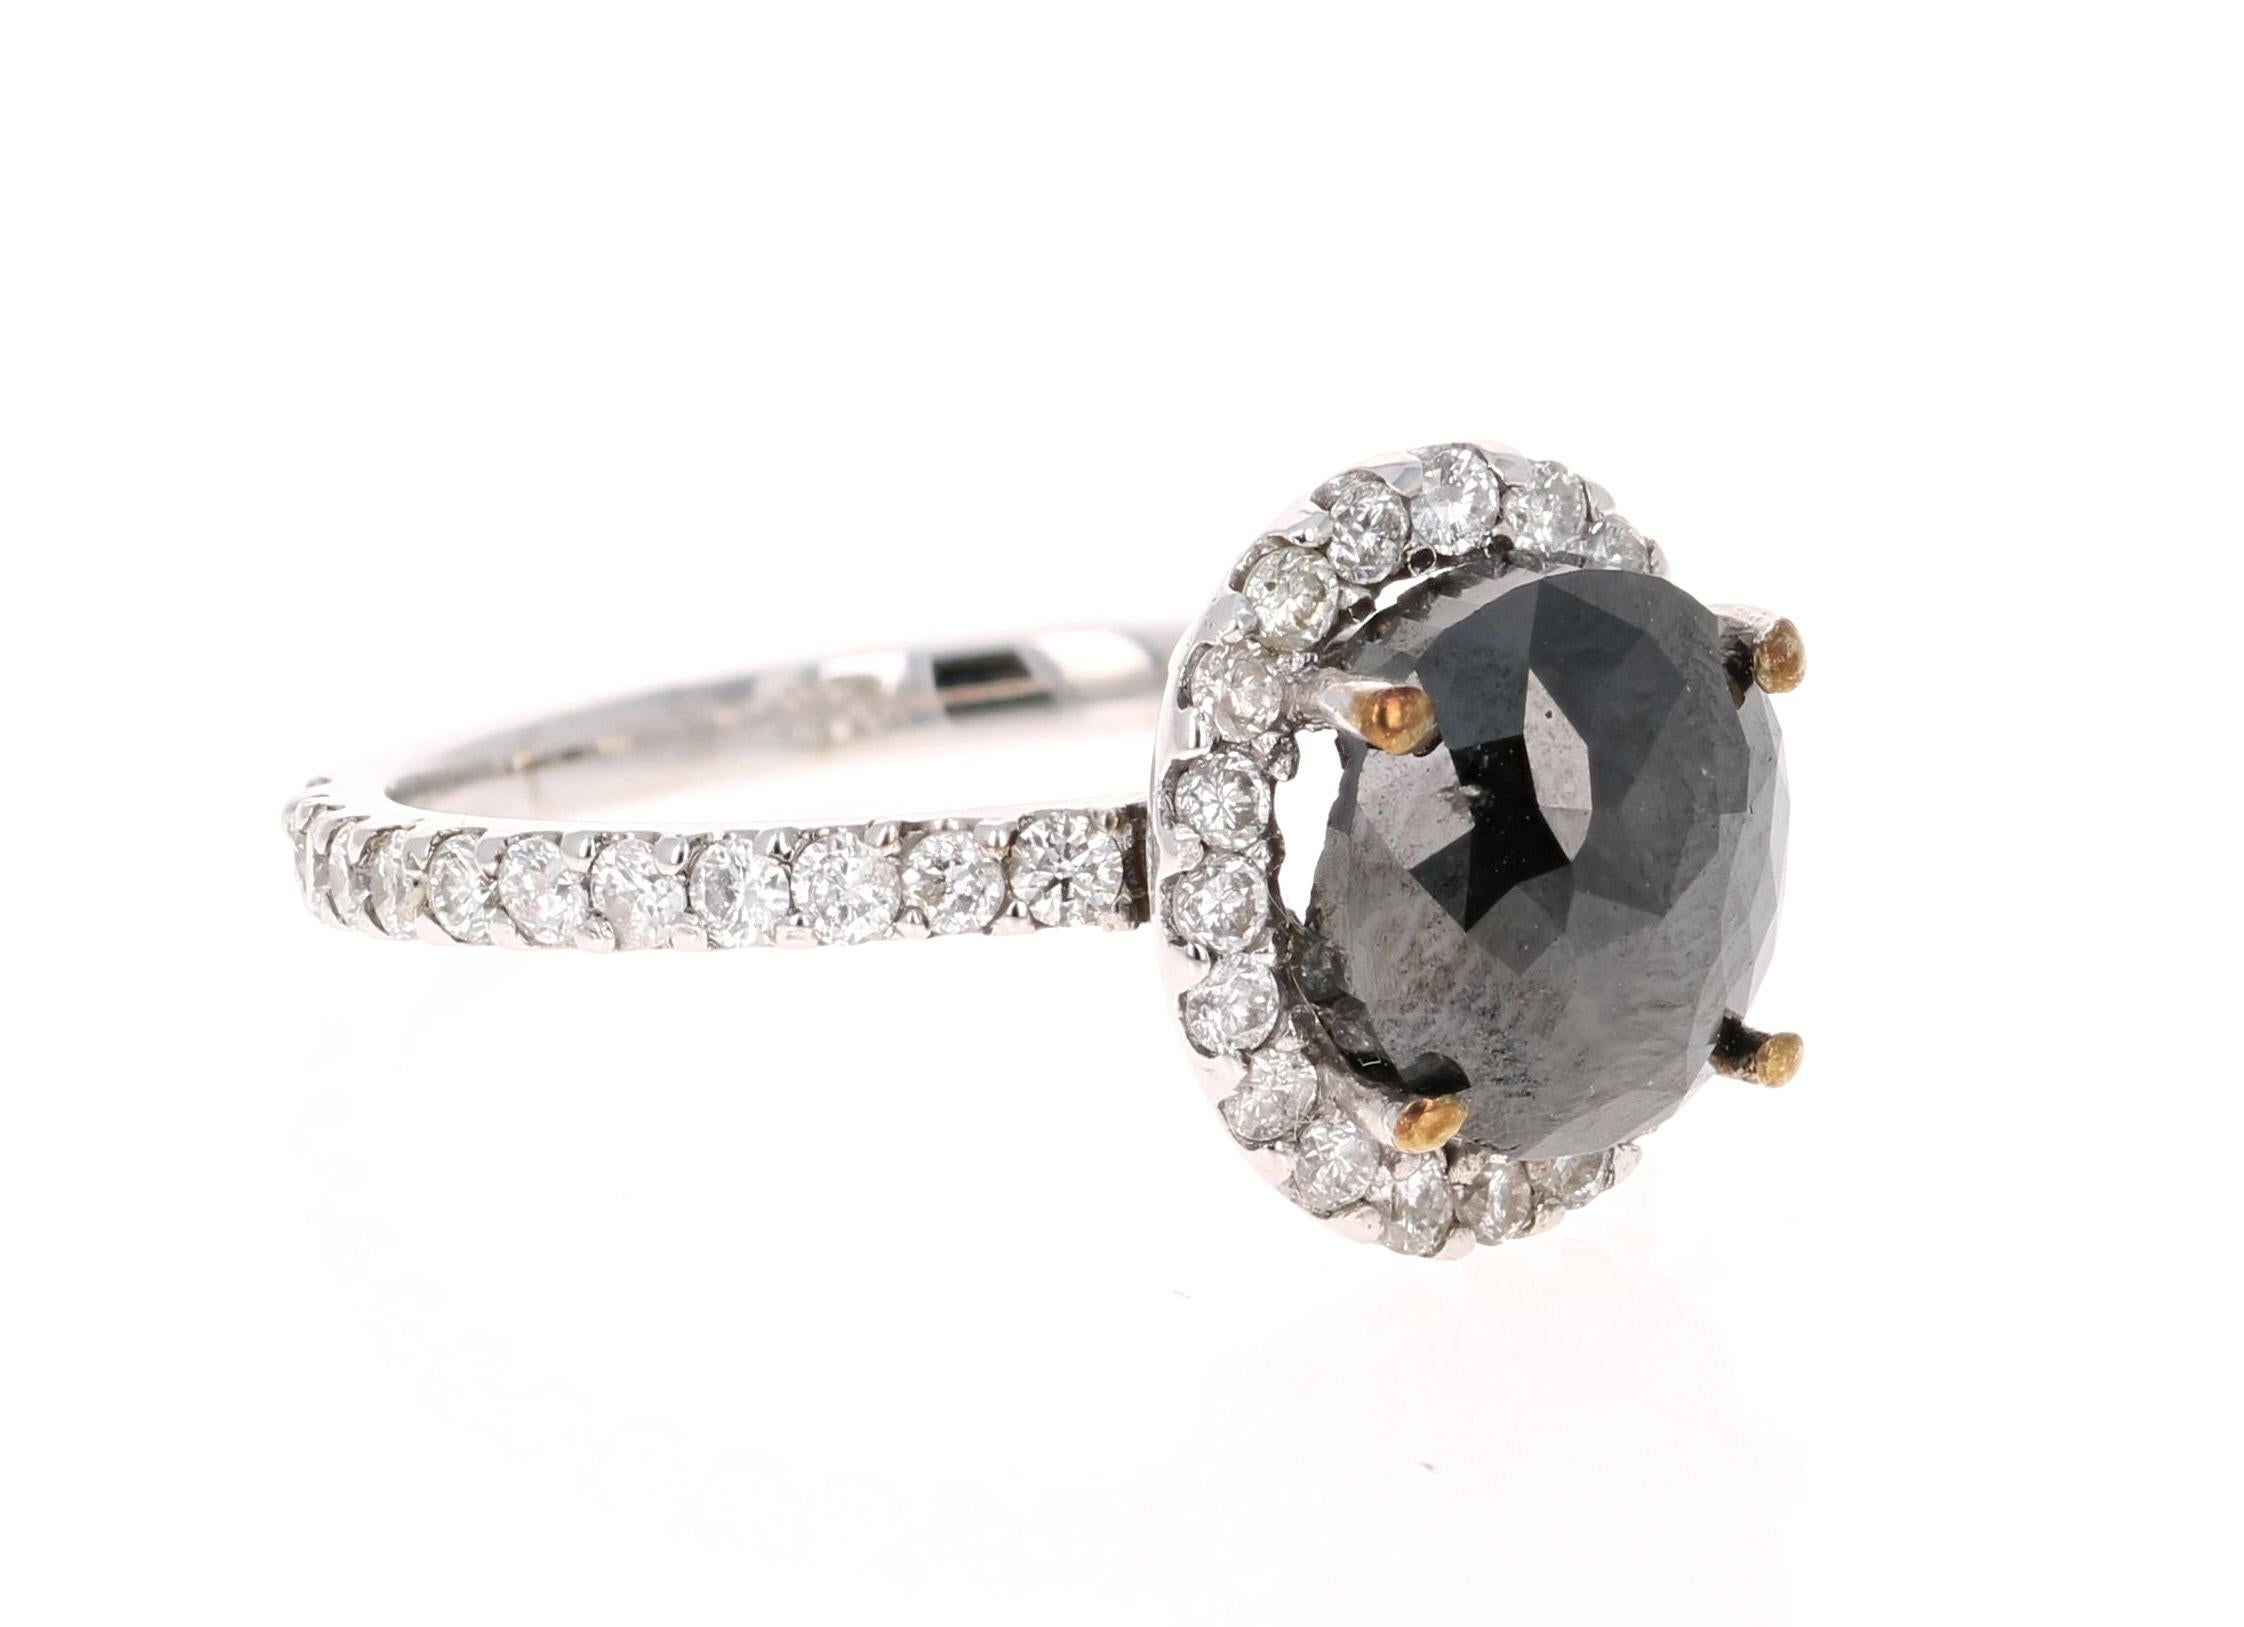 A stunner that can transcend into a unique engagement ring!! This ring is made in 14K White Gold and weighs approximately 3.0 grams. 

The Black Diamond is a Oval Cut and weighs 2.81 carats. The Black Diamond is a natural diamond that has been